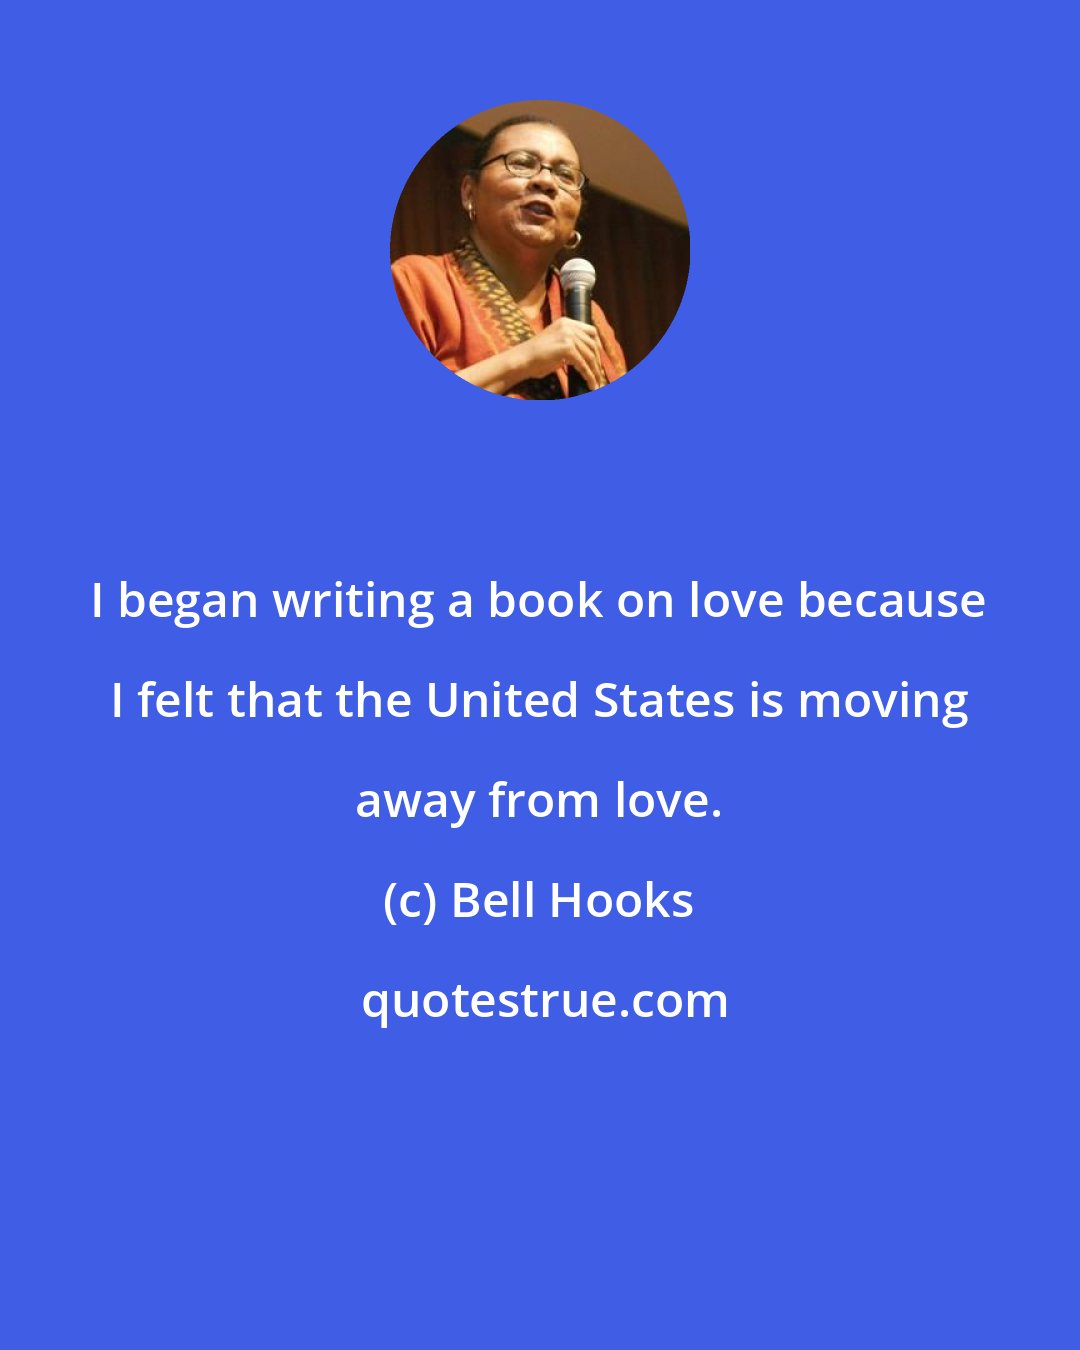 Bell Hooks: I began writing a book on love because I felt that the United States is moving away from love.